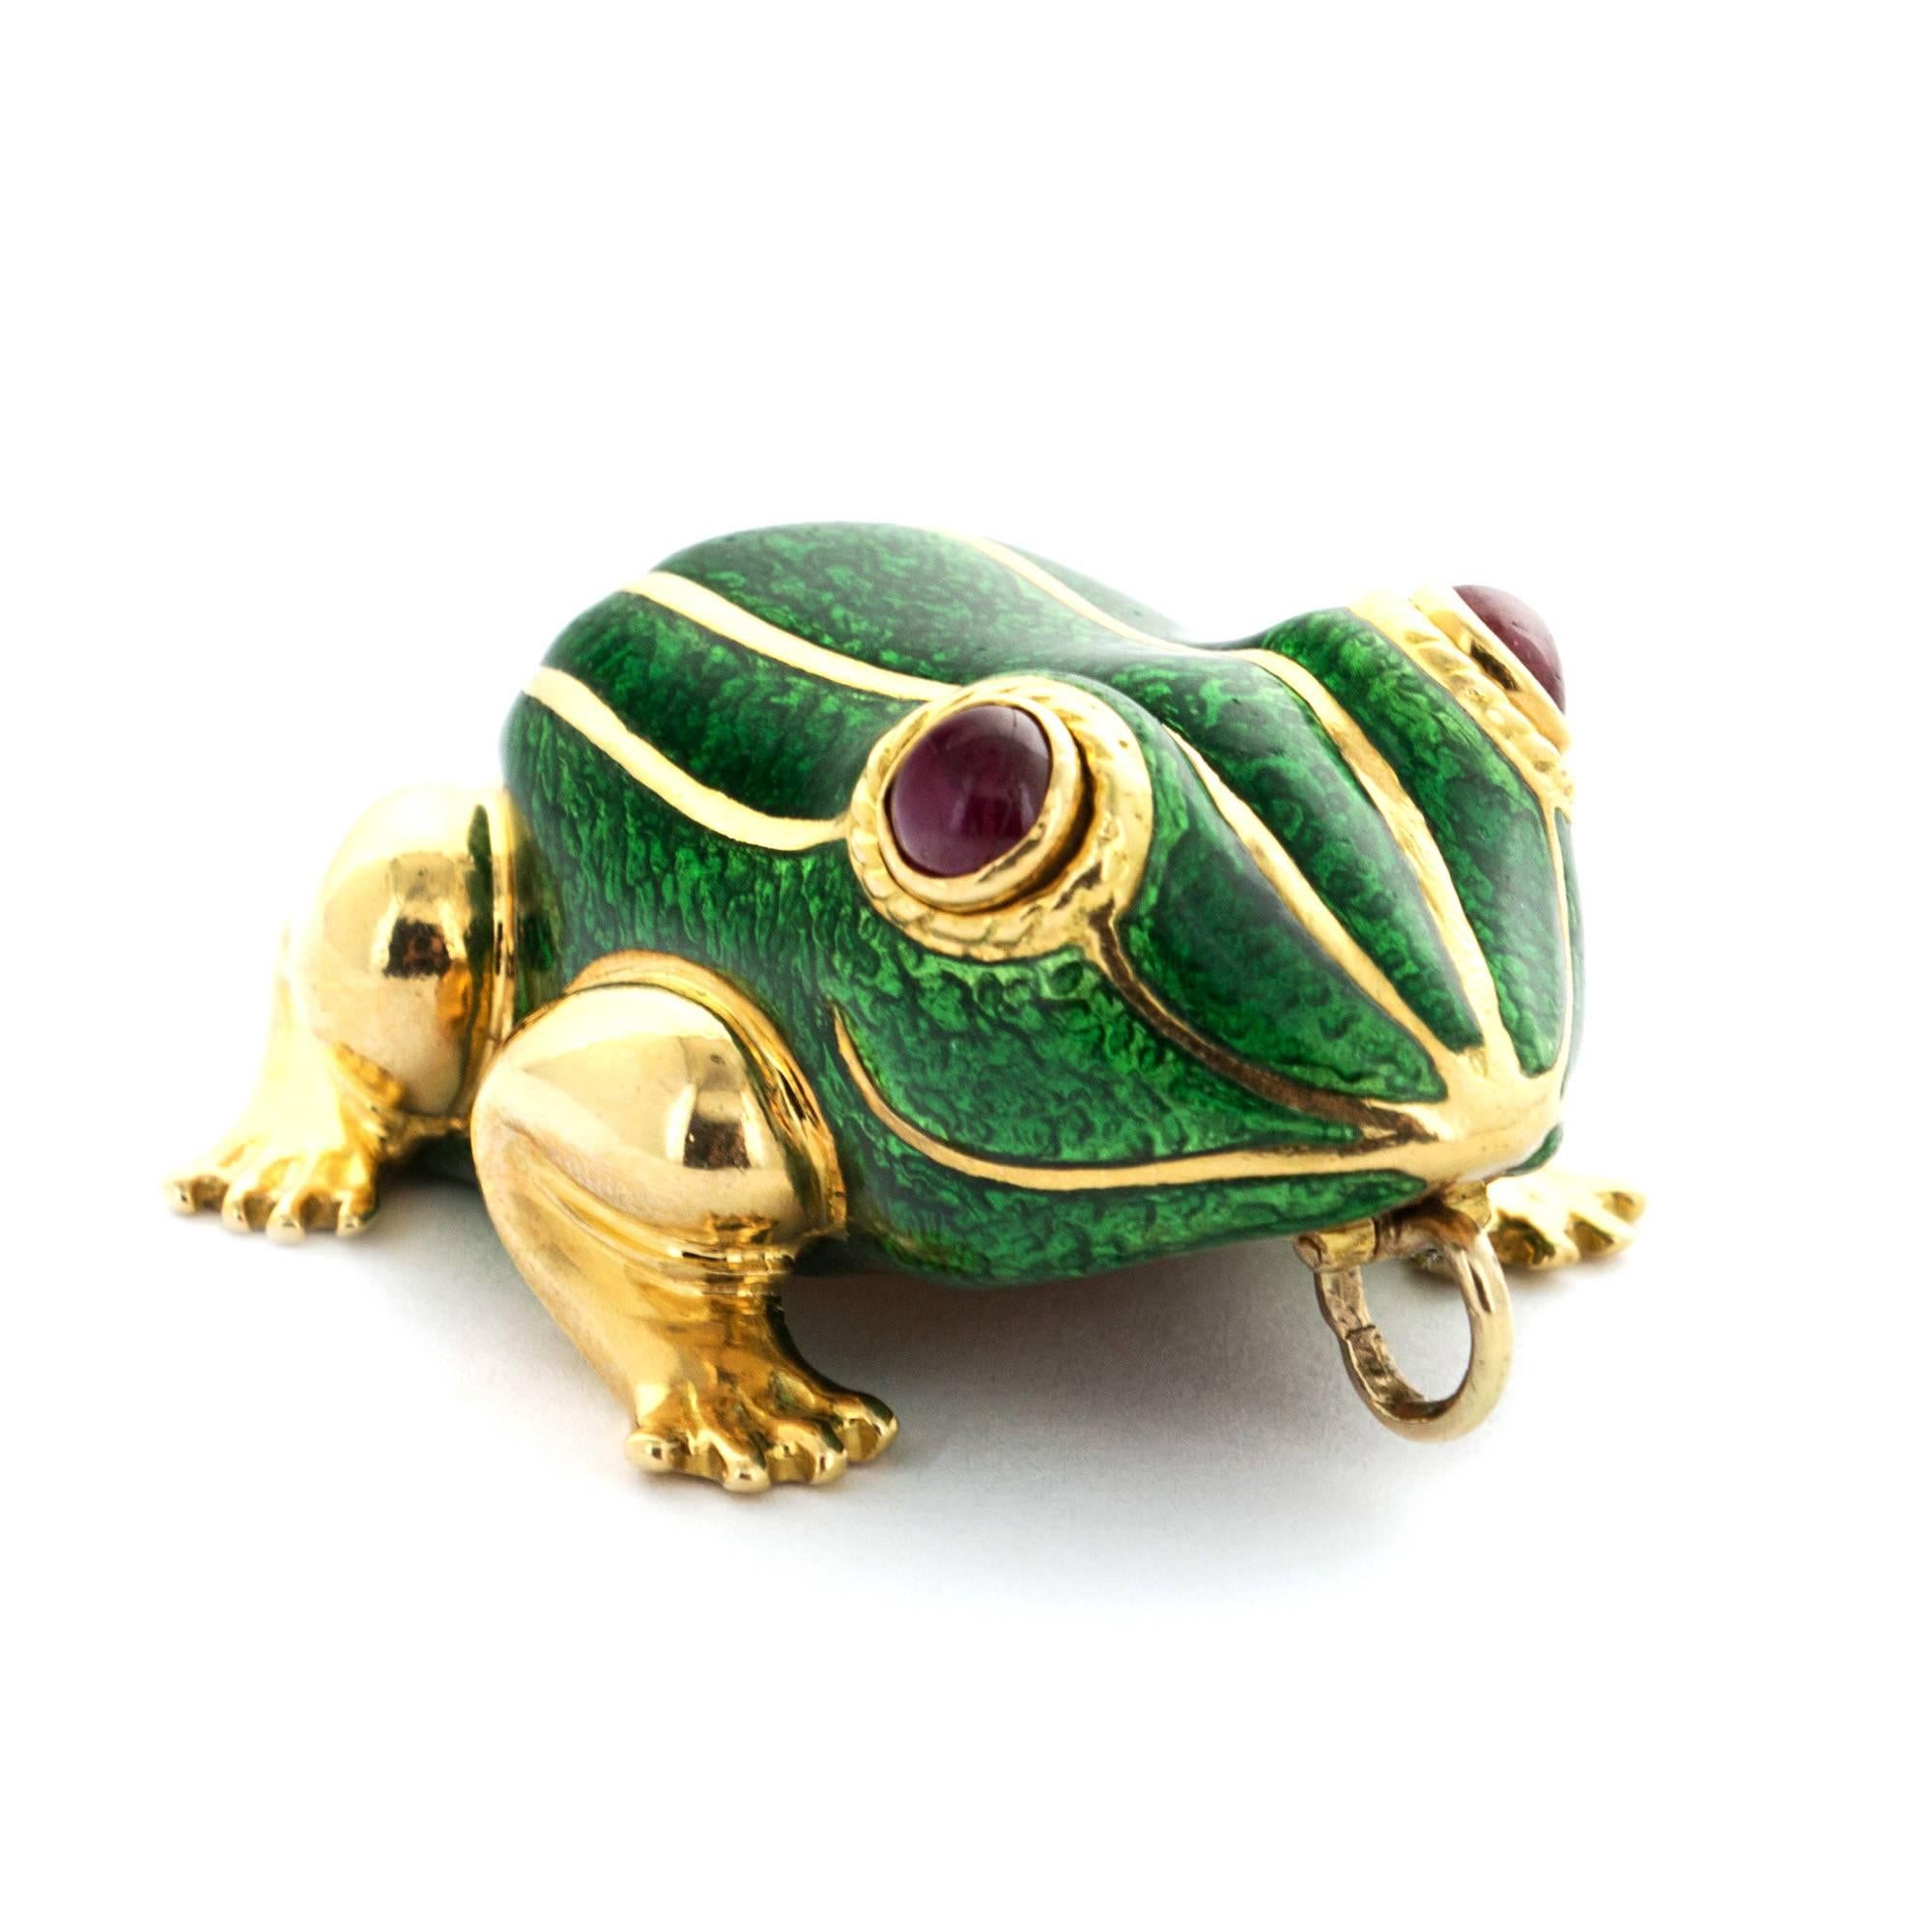 A 1970's 18k Yellow Gold Frog Pendant with Green Enamel and Ruby Eyes. Circa 1970's. 42mm Diameter. 